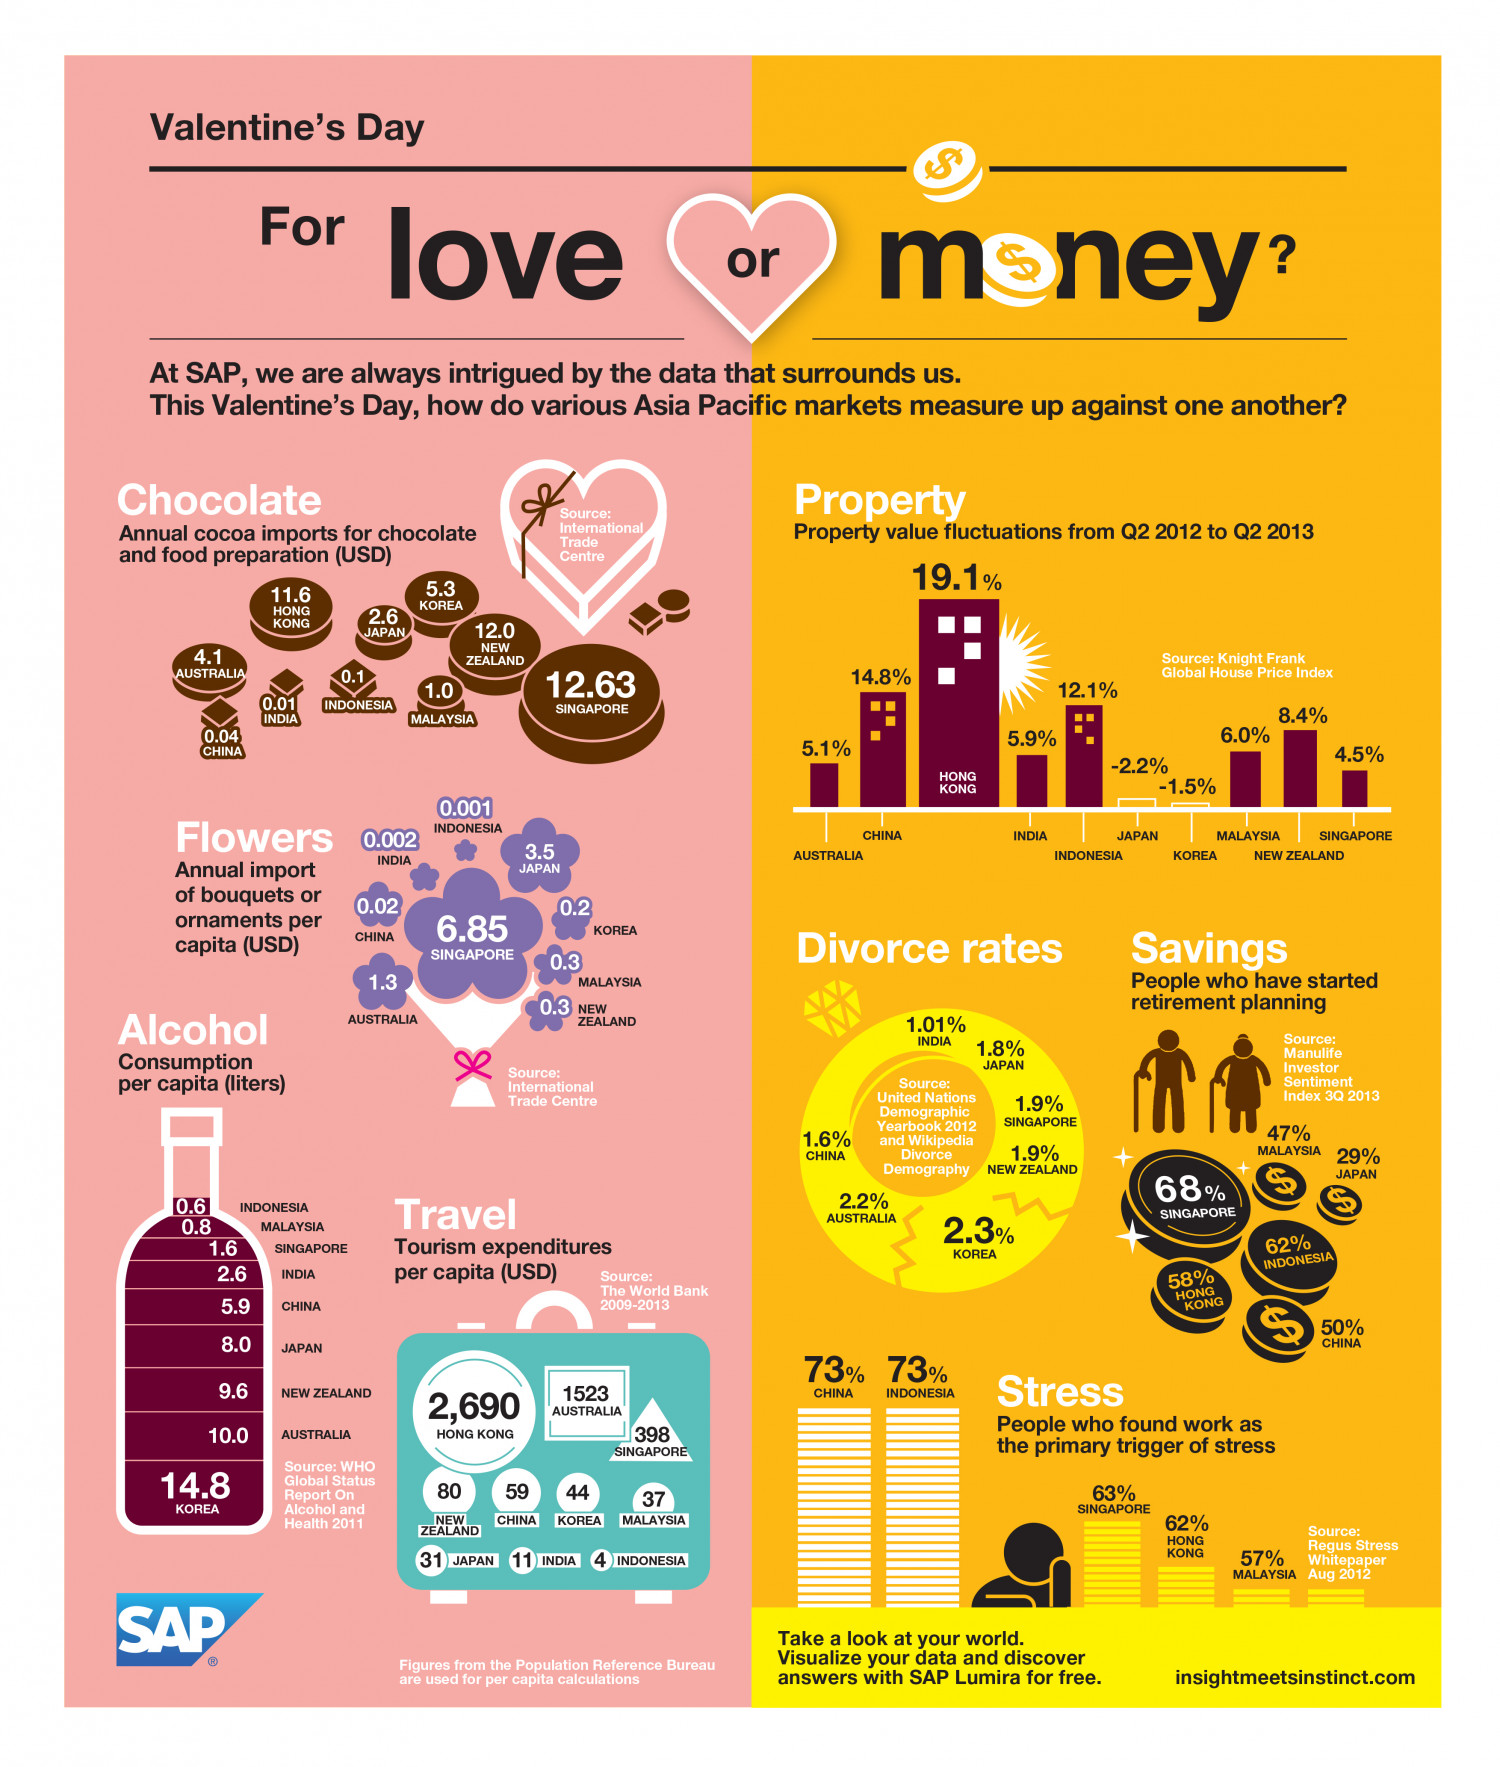 Valentine's Day: For love or money? Infographic